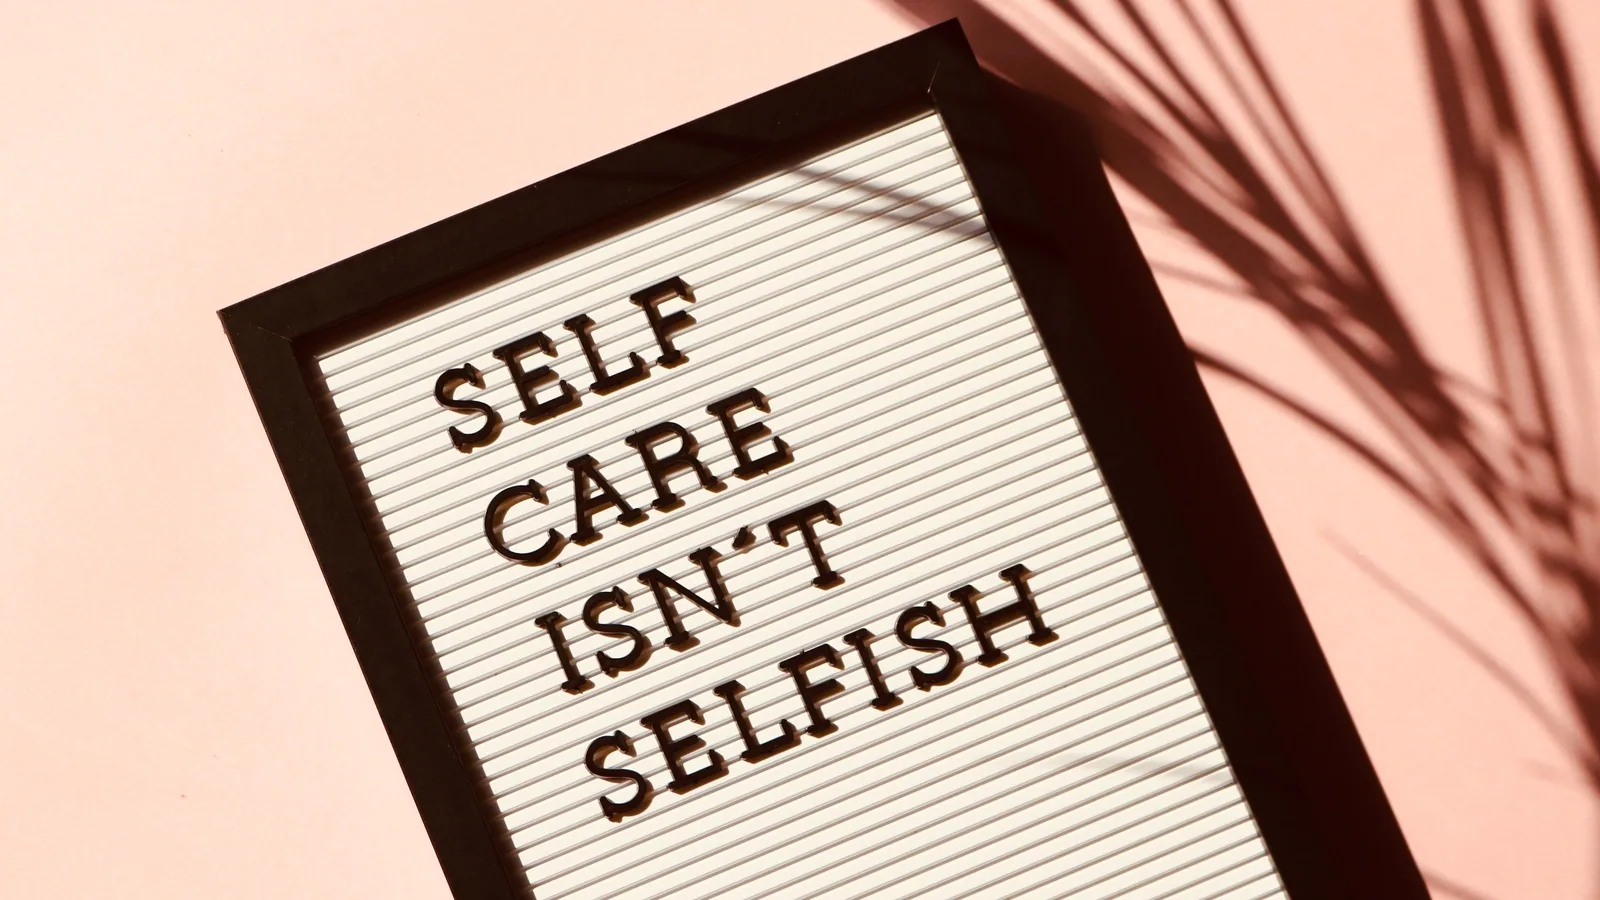 How to actually practice self-care to improve your mental health, psychologists offers tips